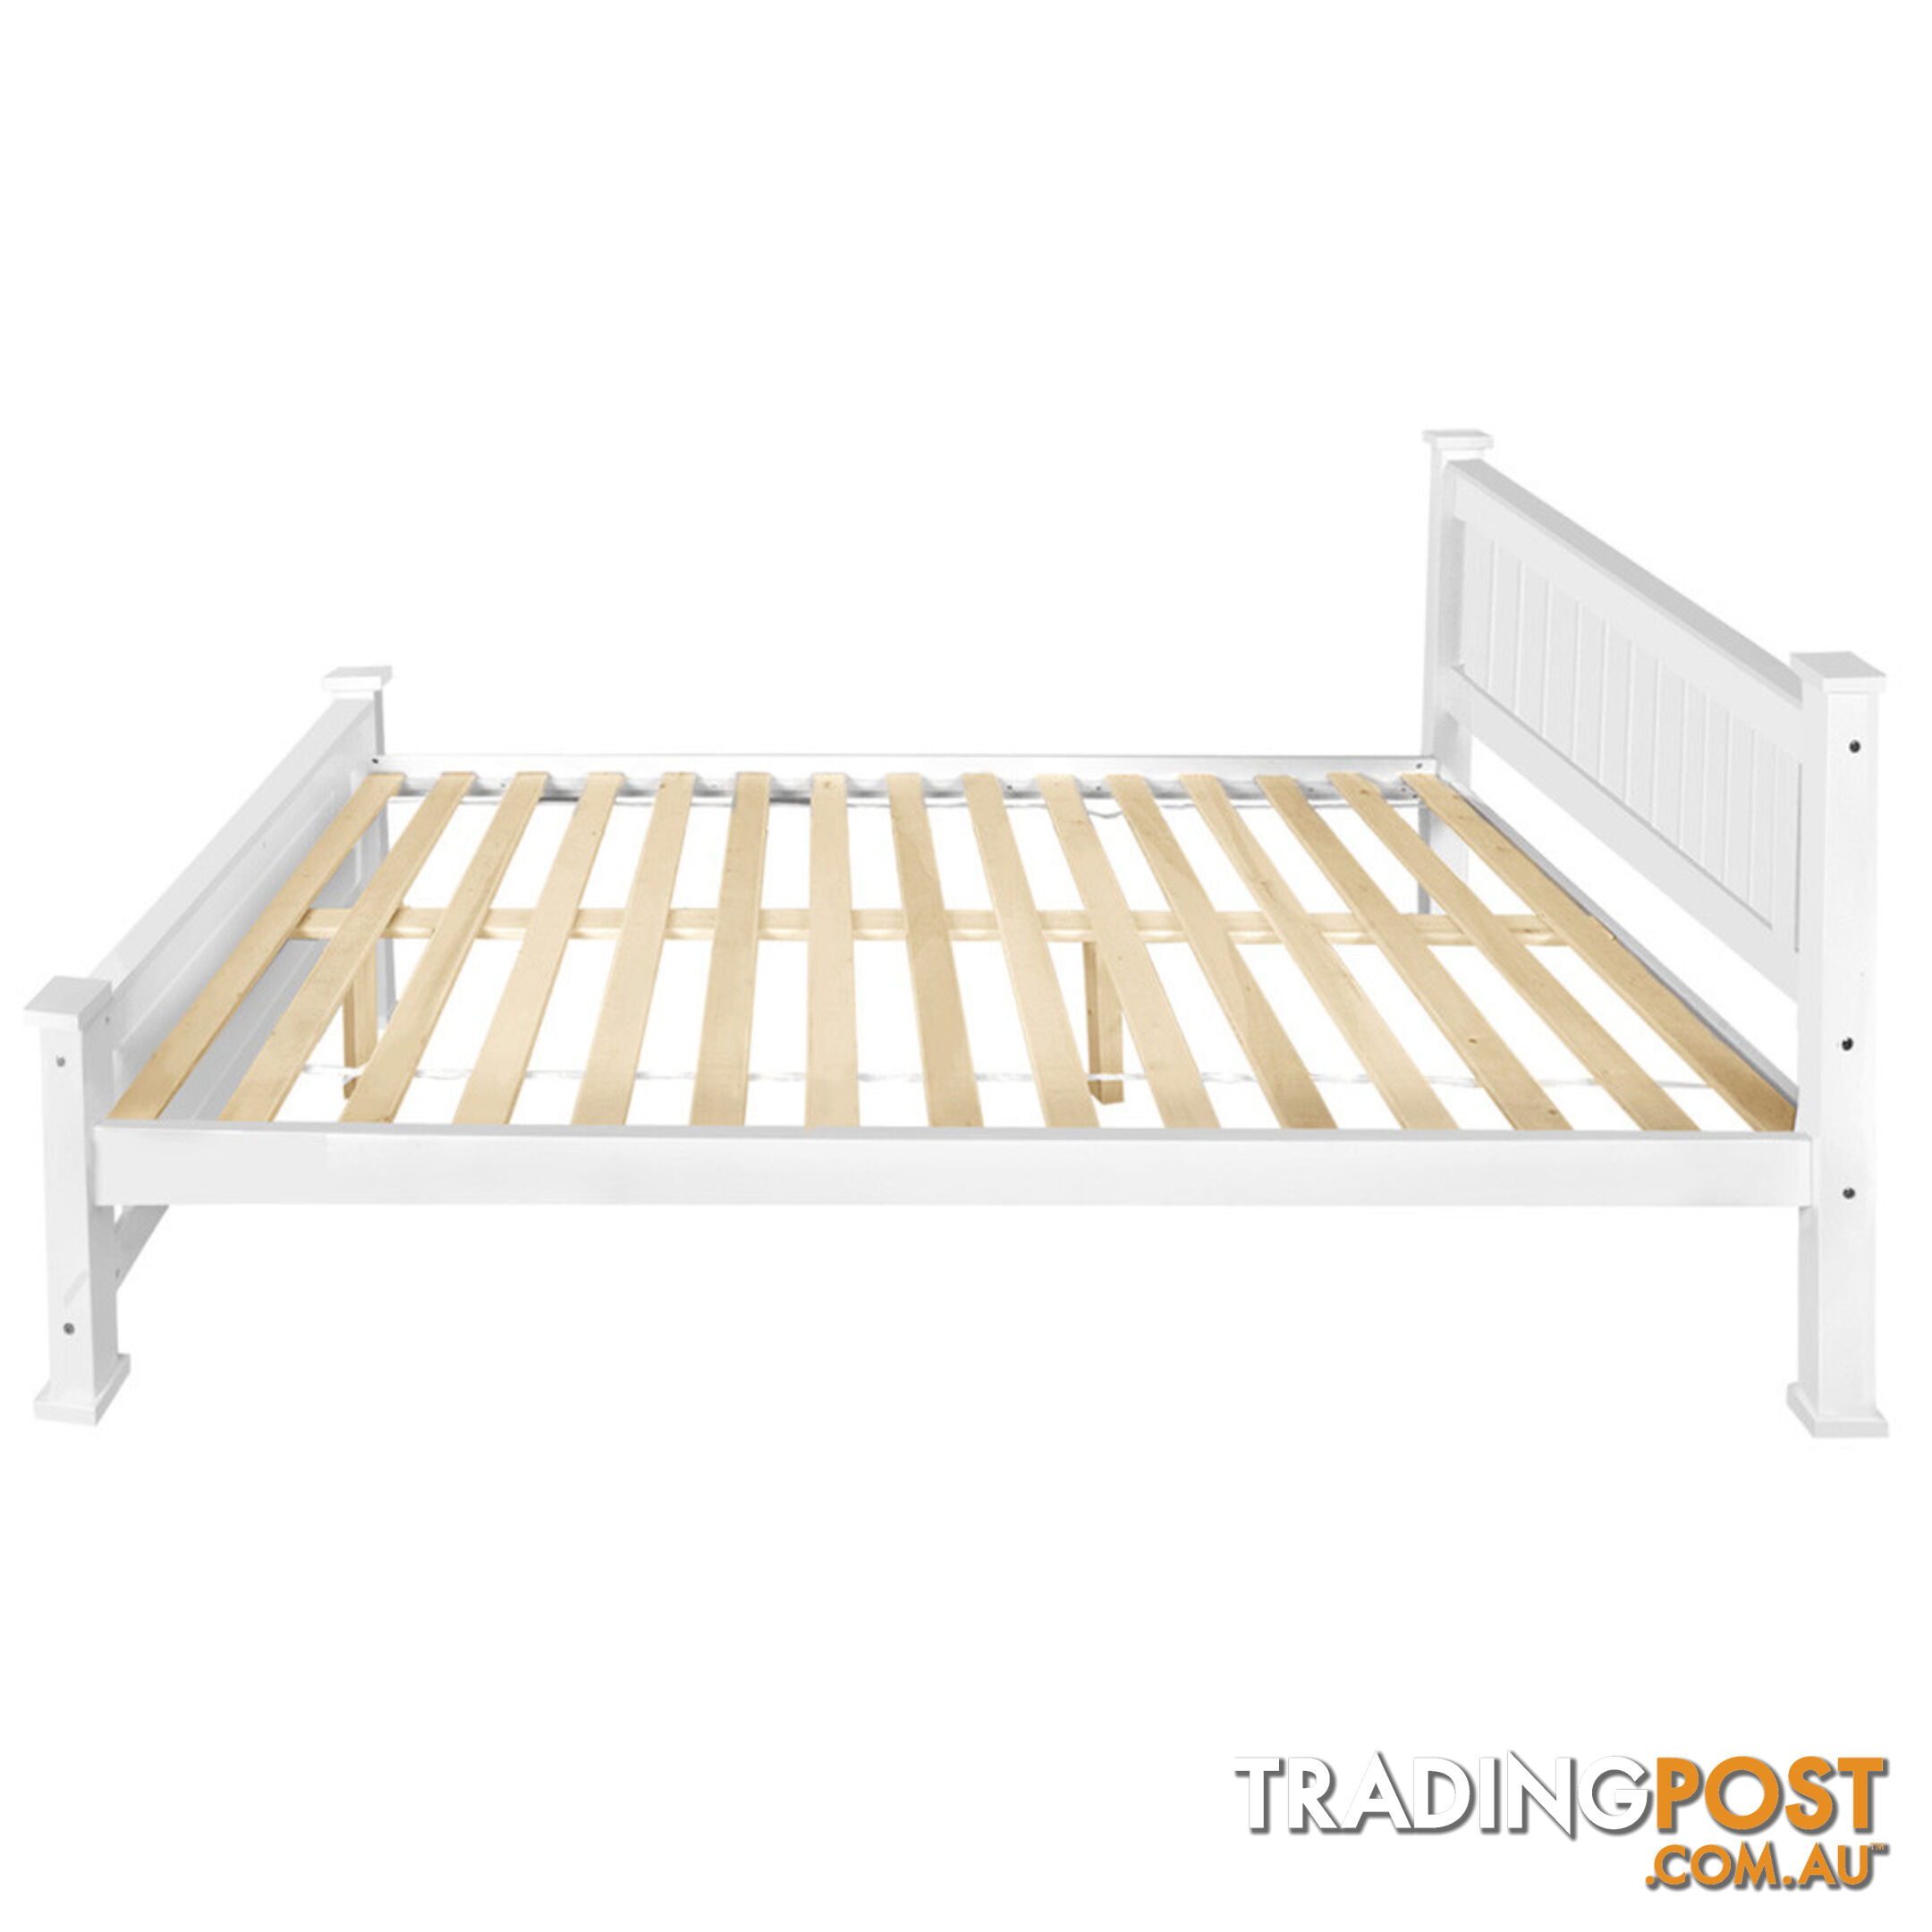 Wooden Bed Frame Pine Wood Single White